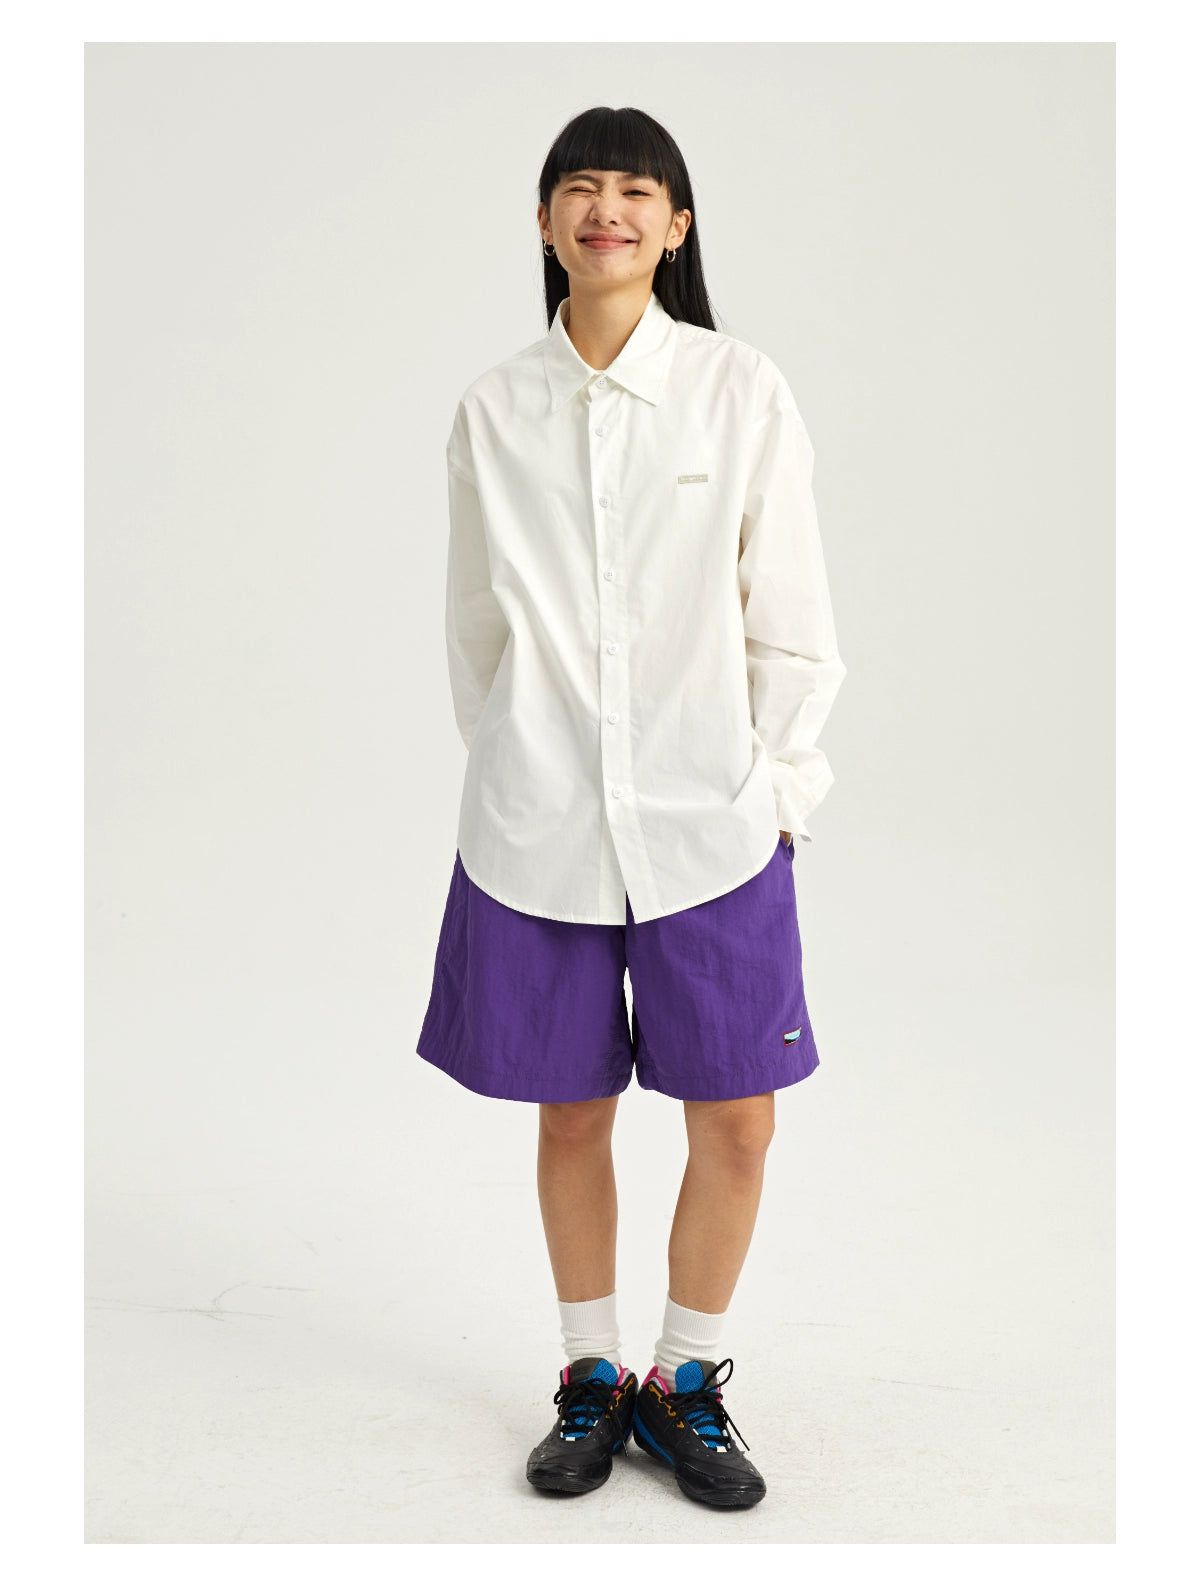 Neat Buttomed Casual Shirt Korean Street Fashion Shirt By WASSUP Shop Online at OH Vault